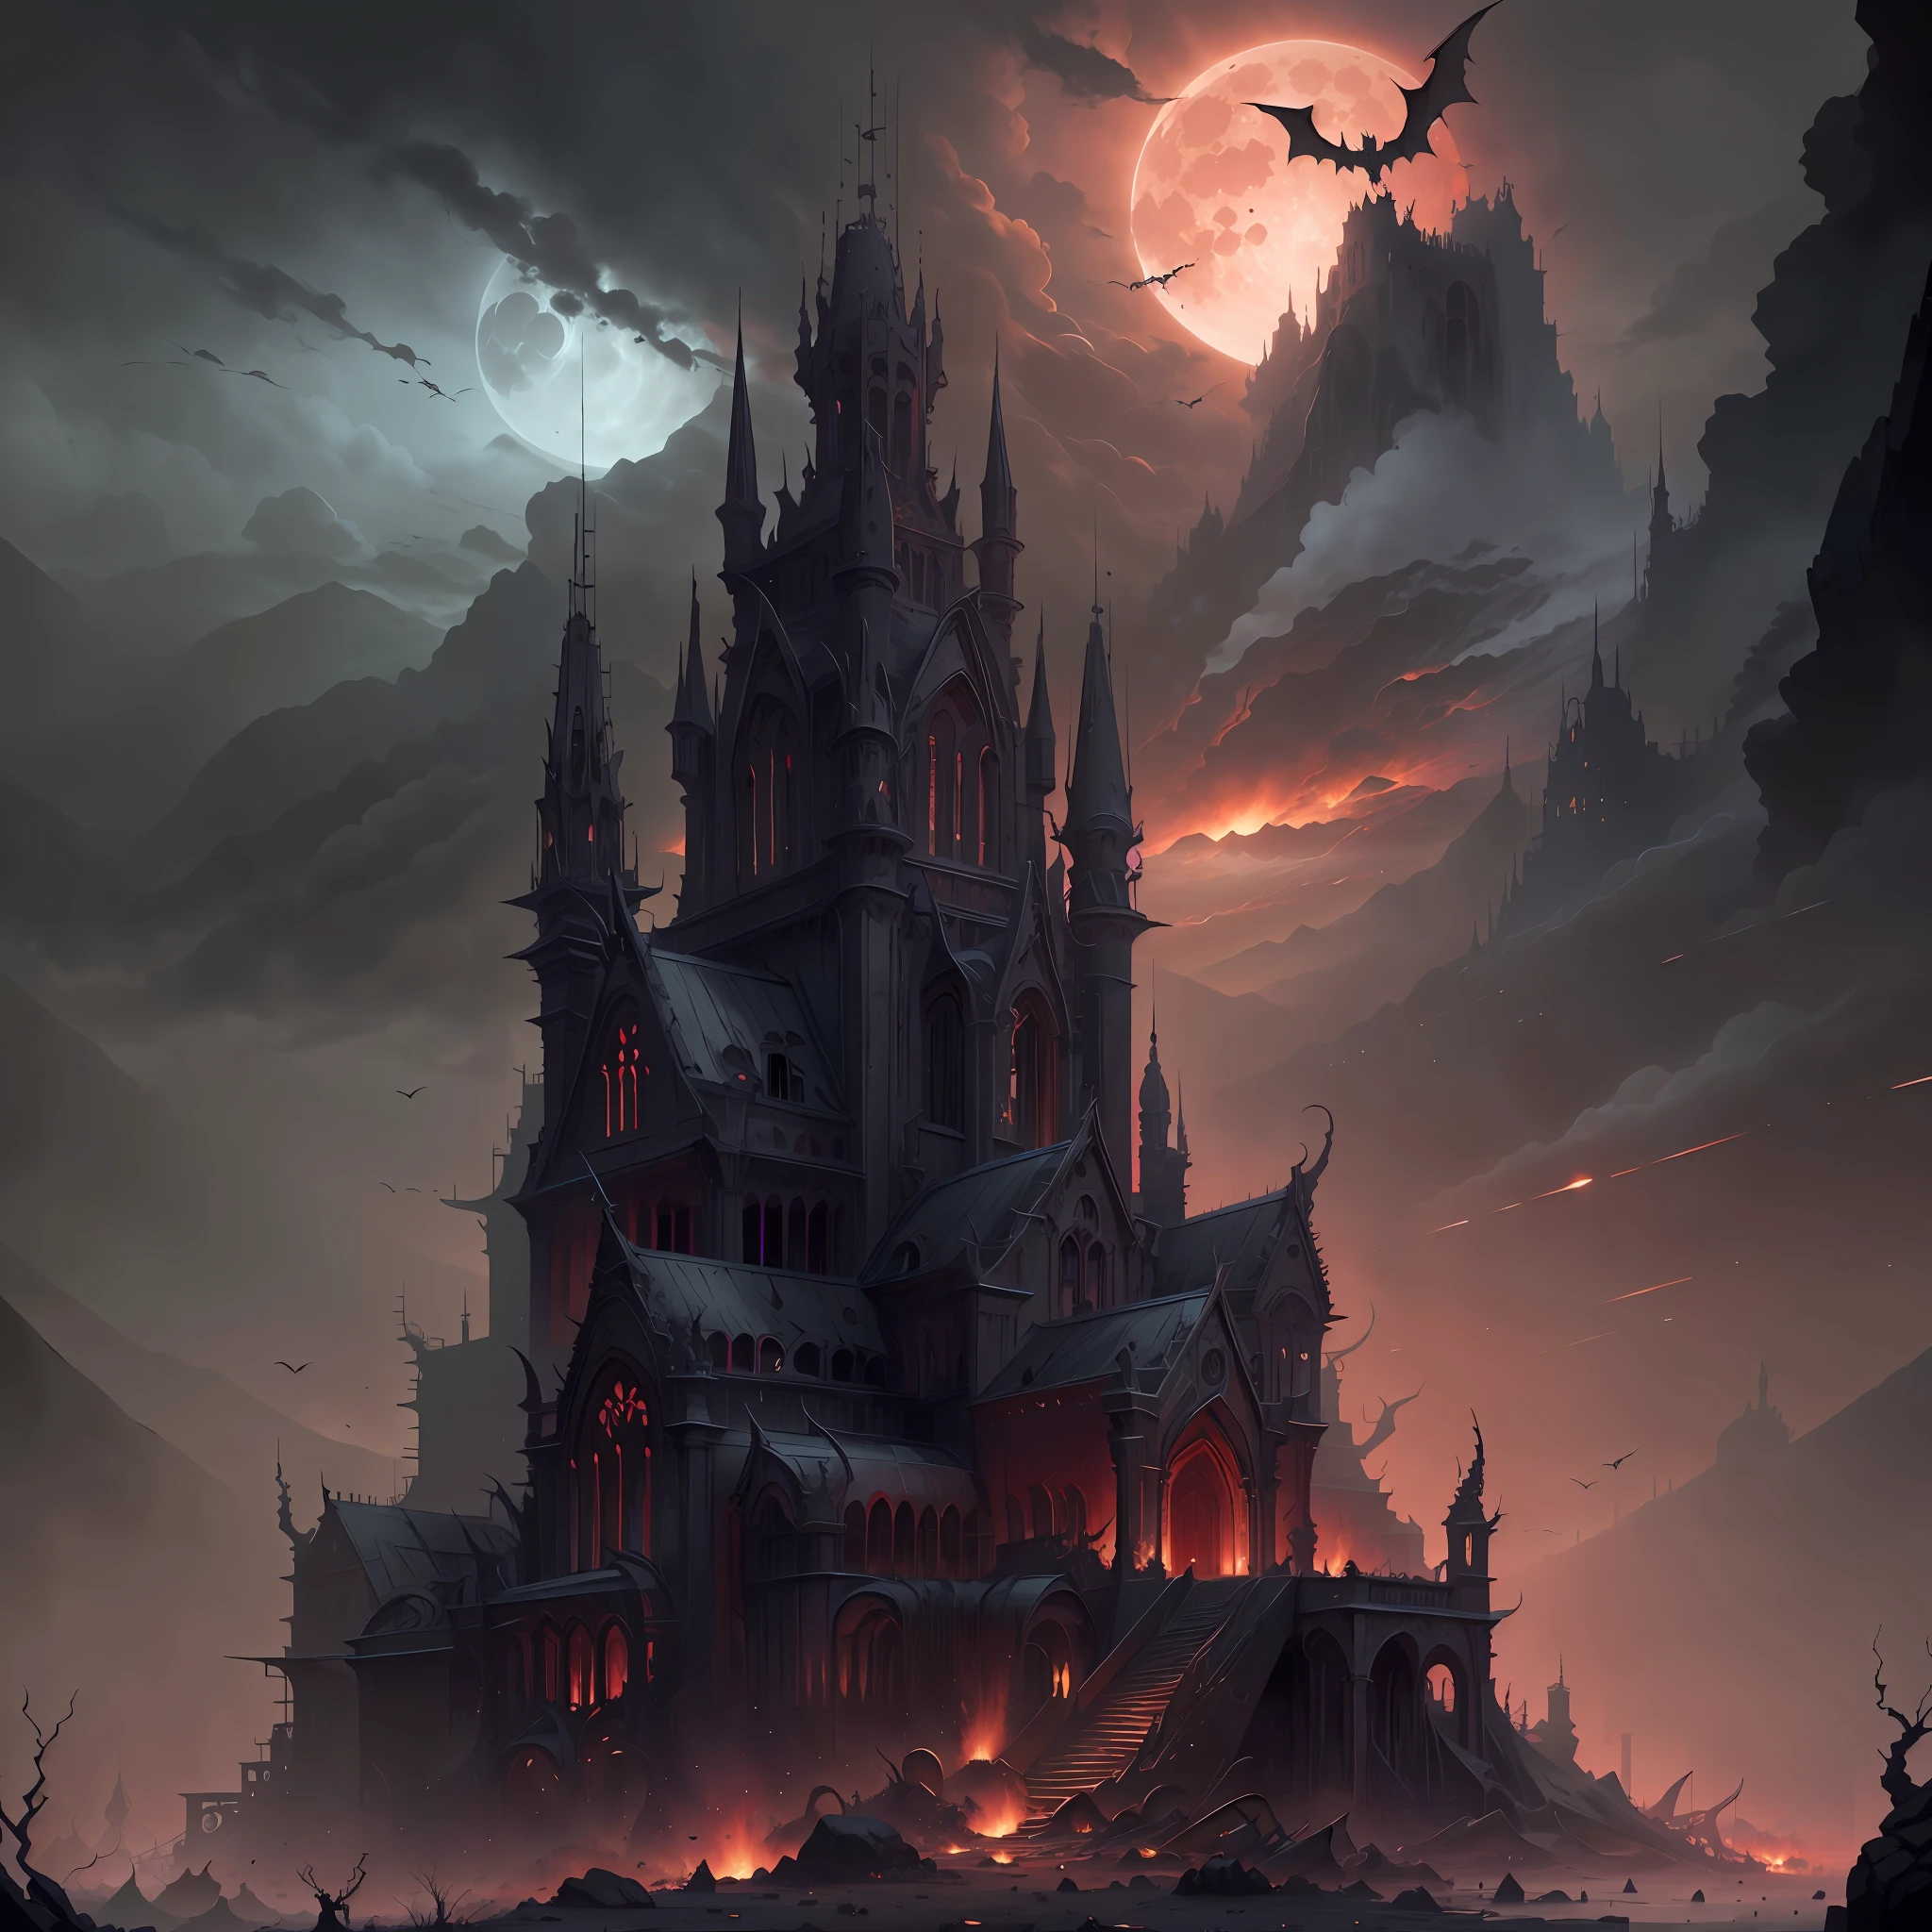 A creepy black castle，Fortress of fantasy，spireinaret，Masonry construction，Rust carved pattern，Iron railings，Broken appearance，Black clouds，Black sky，Black night，Big red moon，Big old tree，Surrounded by mountains，the woods，Flying bats，Gothpunk，gothicarchitecture，Arched windows，The windows are dimly red，Punk-style ruins，stereogram, Black tone lighting， cinematic lighting,  8k, super detail, ccurate, best quality